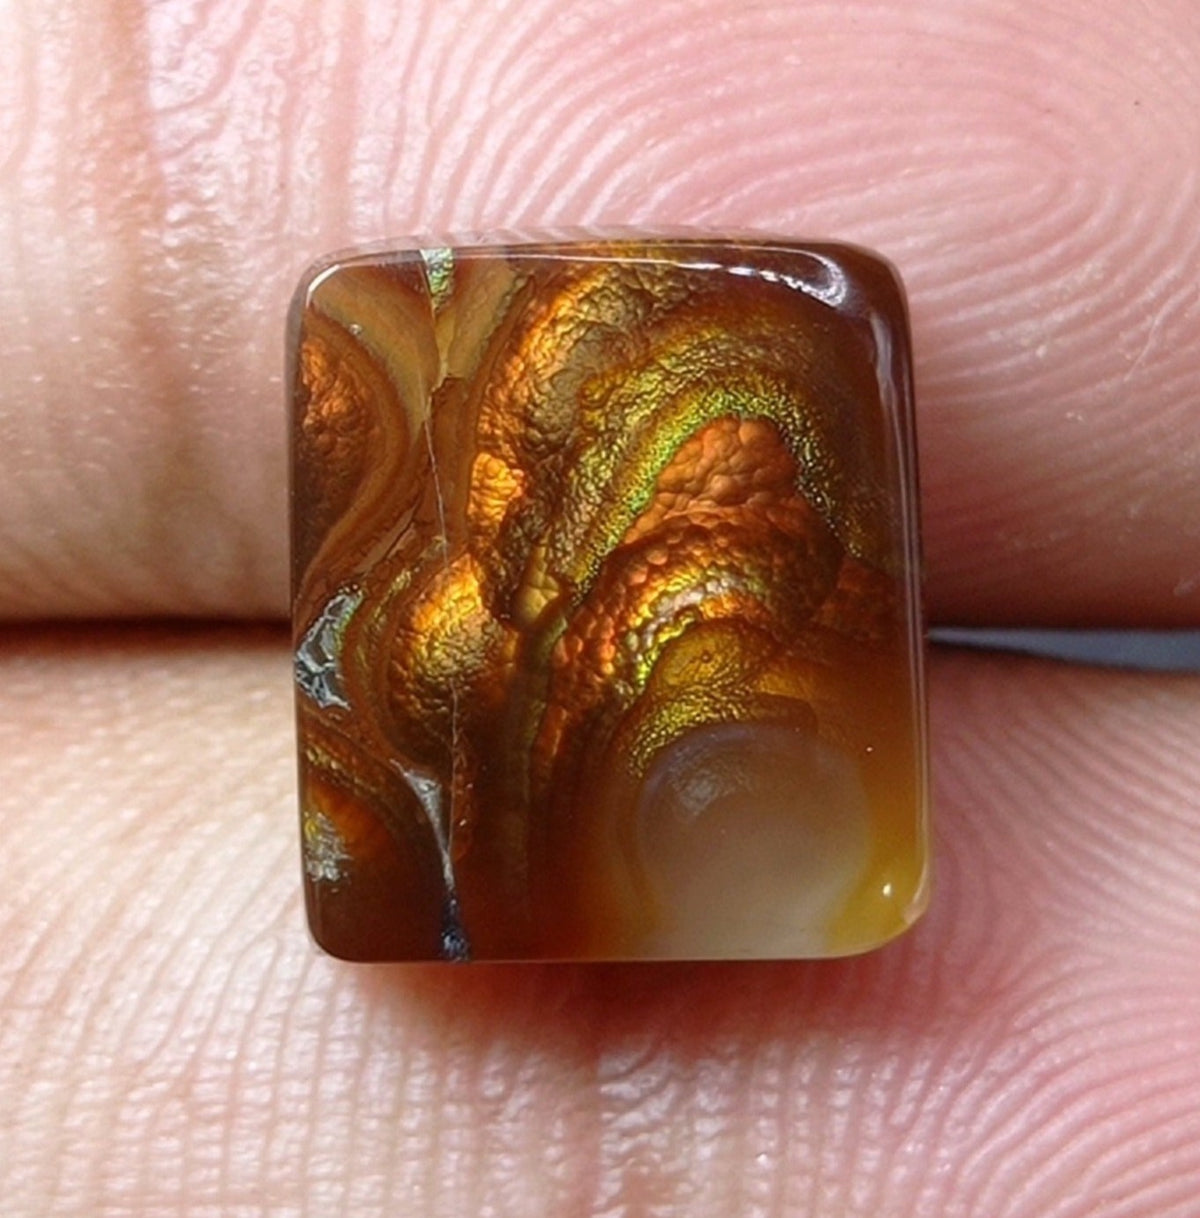 7.2ct Mexican Fire Agate,  Rare Fire Agate, Colorfully Squared Fire Agate, Perfect gemstone Gift For All, Dimensions 12x11x4mm